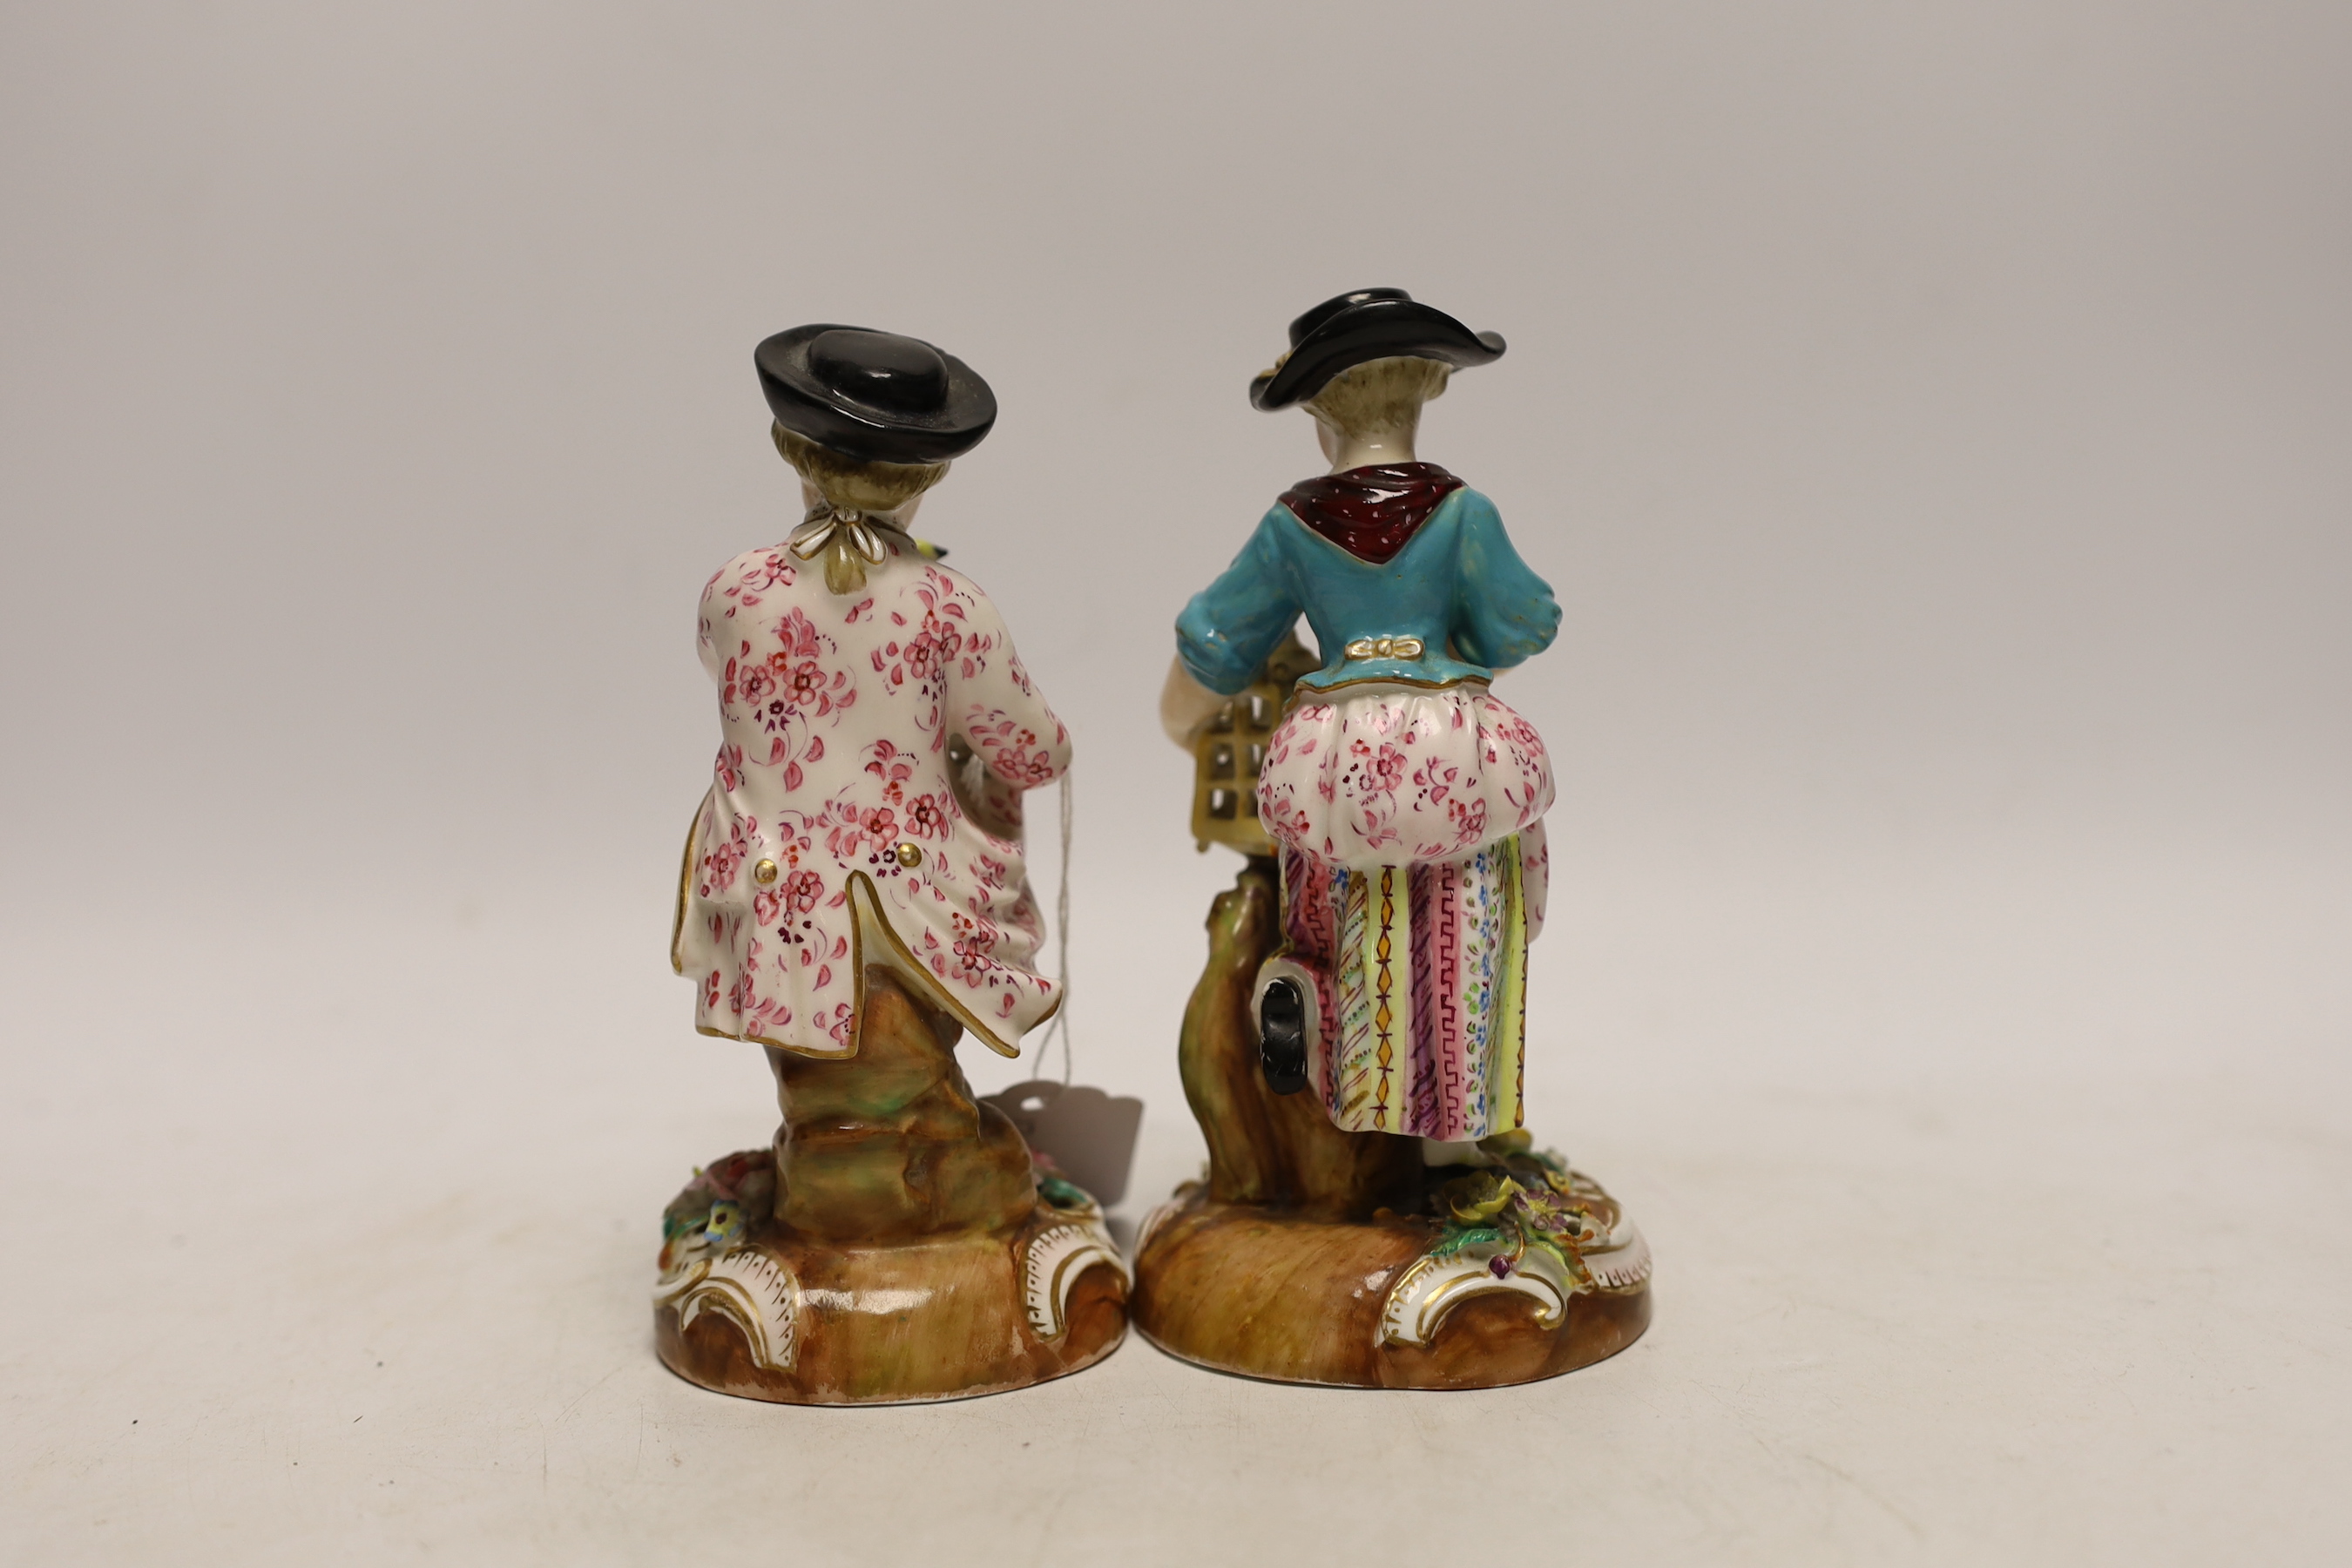 A pair of John Bevington figures, late 19th century, both holding birds with floral encrusted bases, 15.5cm